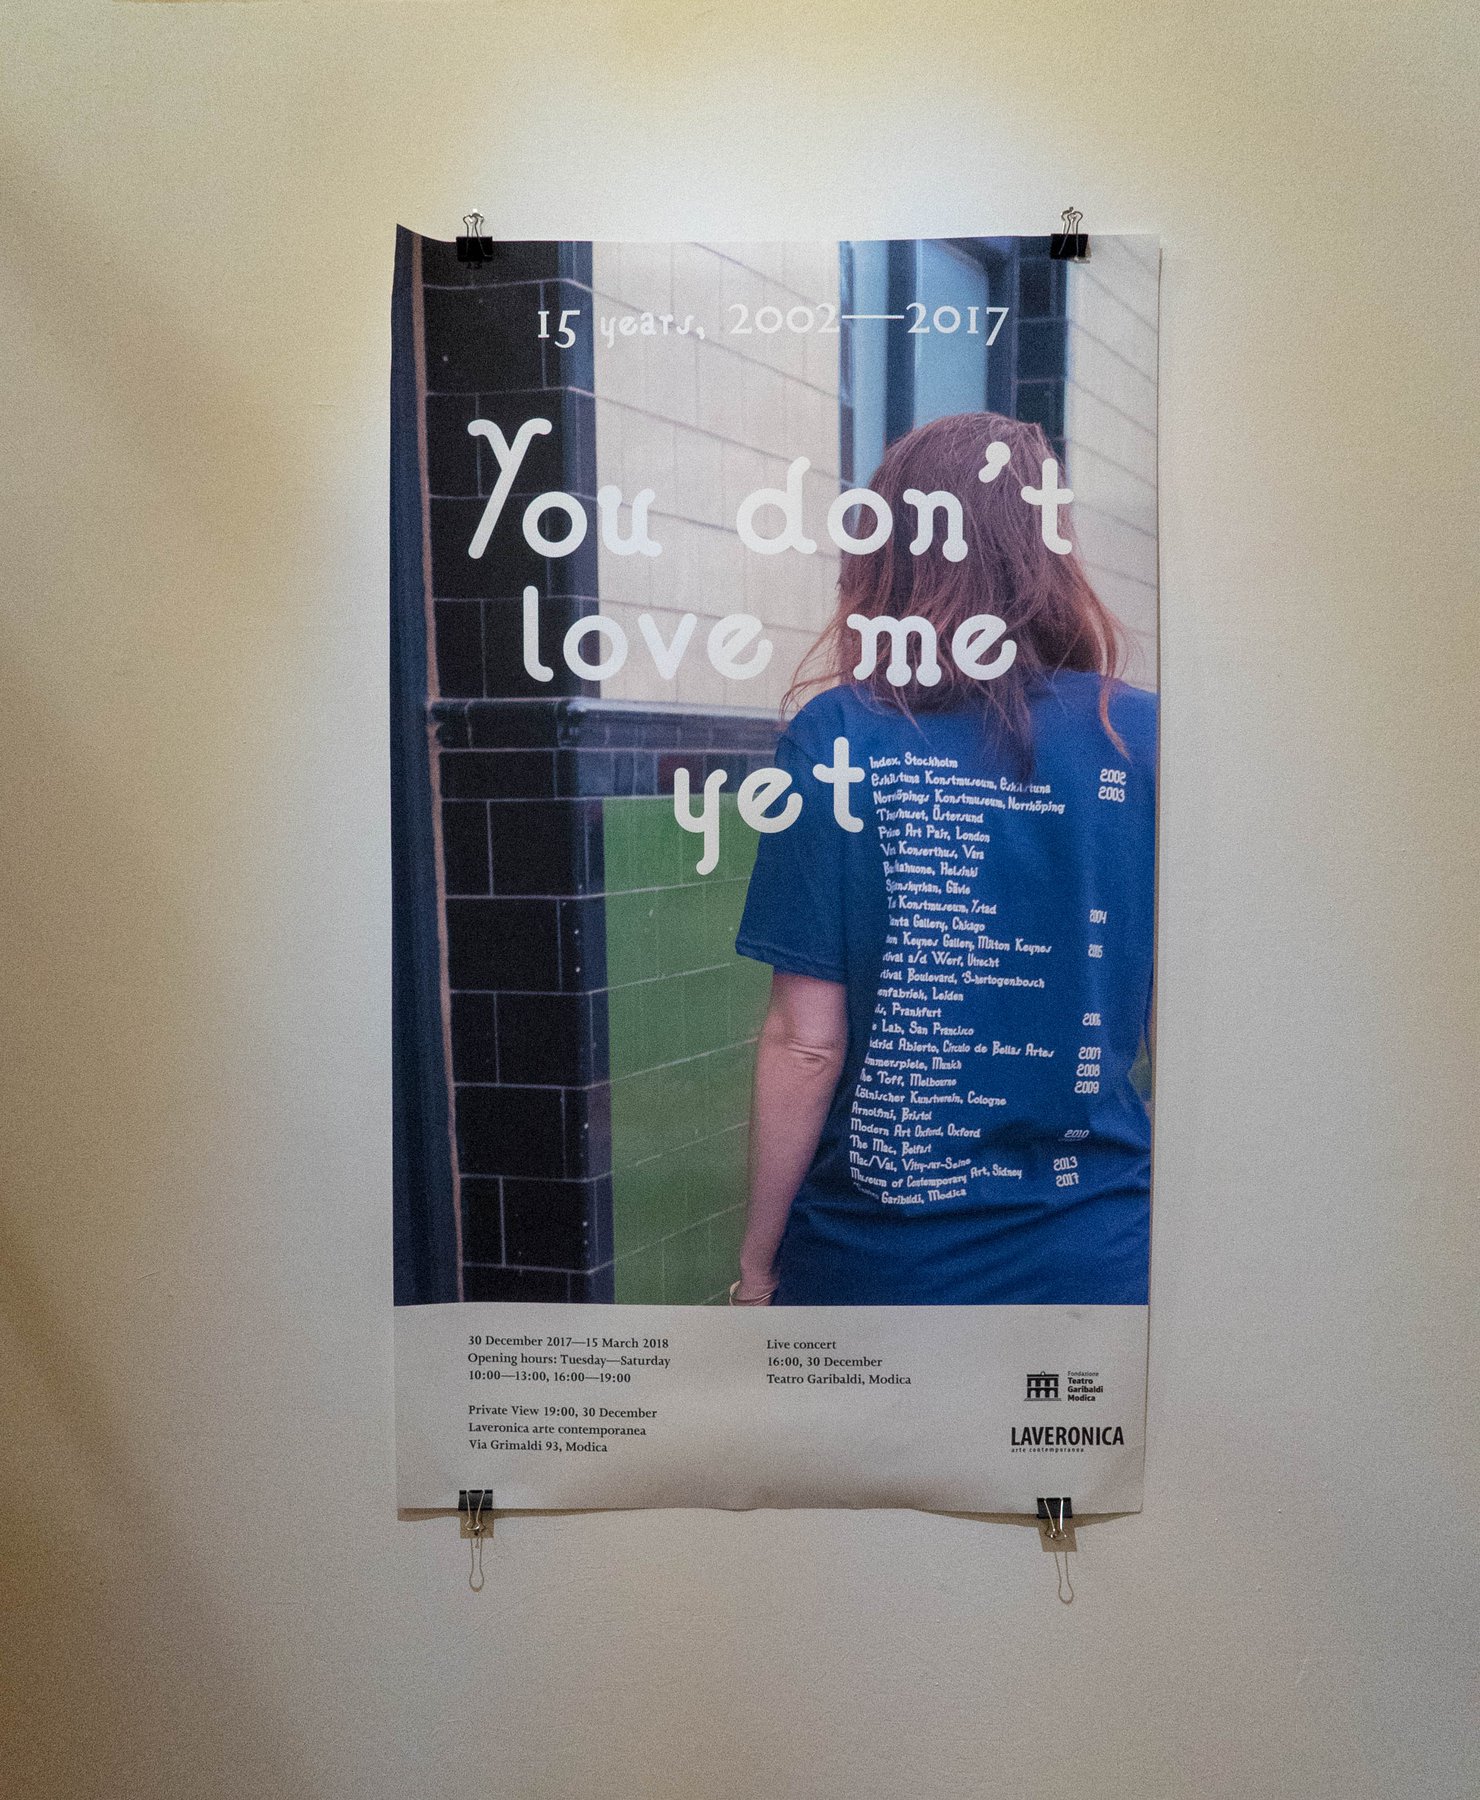 15 Years of You Don’t Love me Yet 2002-2017, installation view at Laveronica arte contemporanea